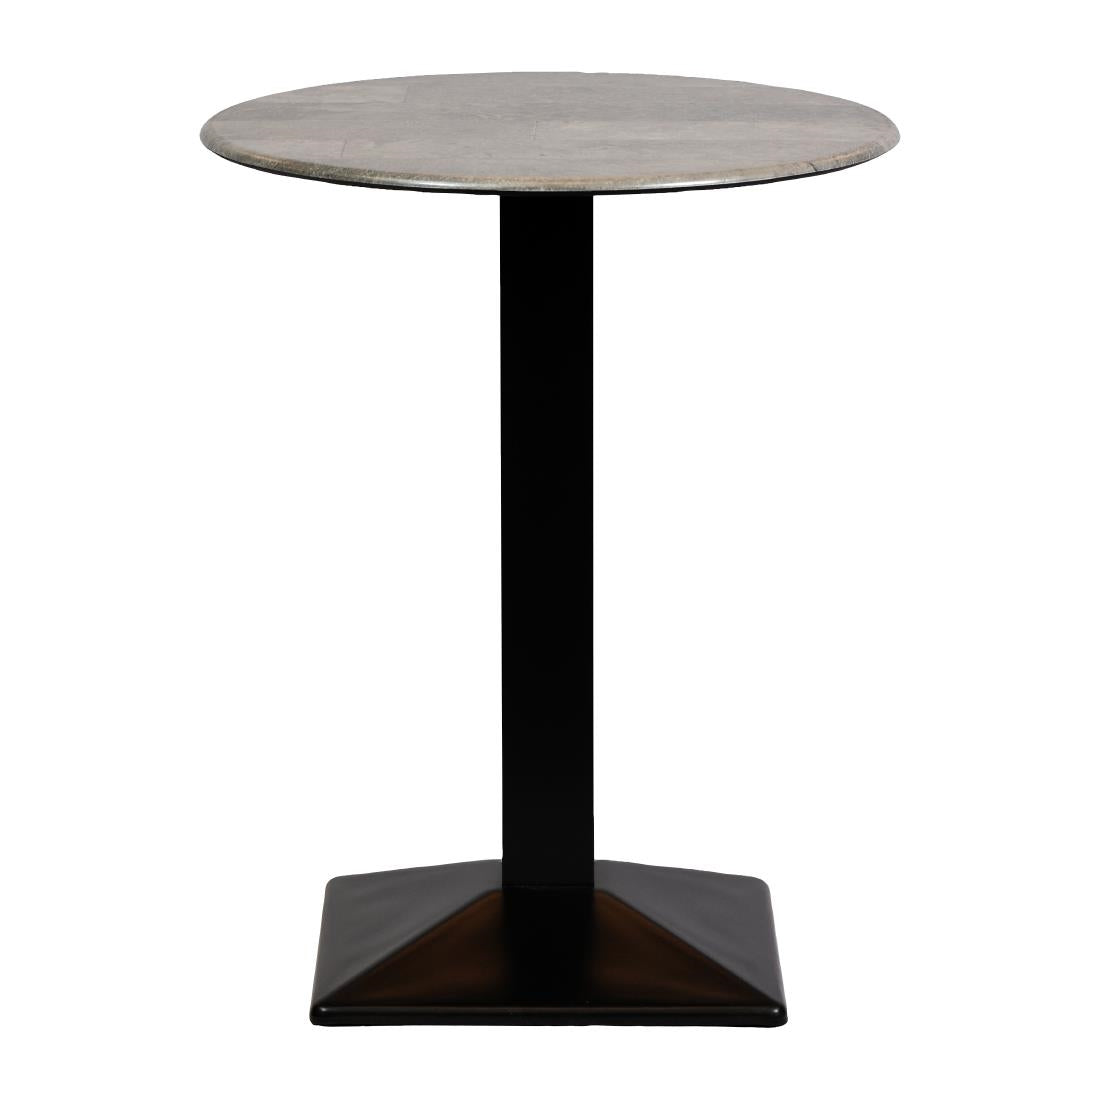 CZ835 Turin Metal Base Round Poseur Table with Laminate Top Concrete 600mm JD Catering Equipment Solutions Ltd